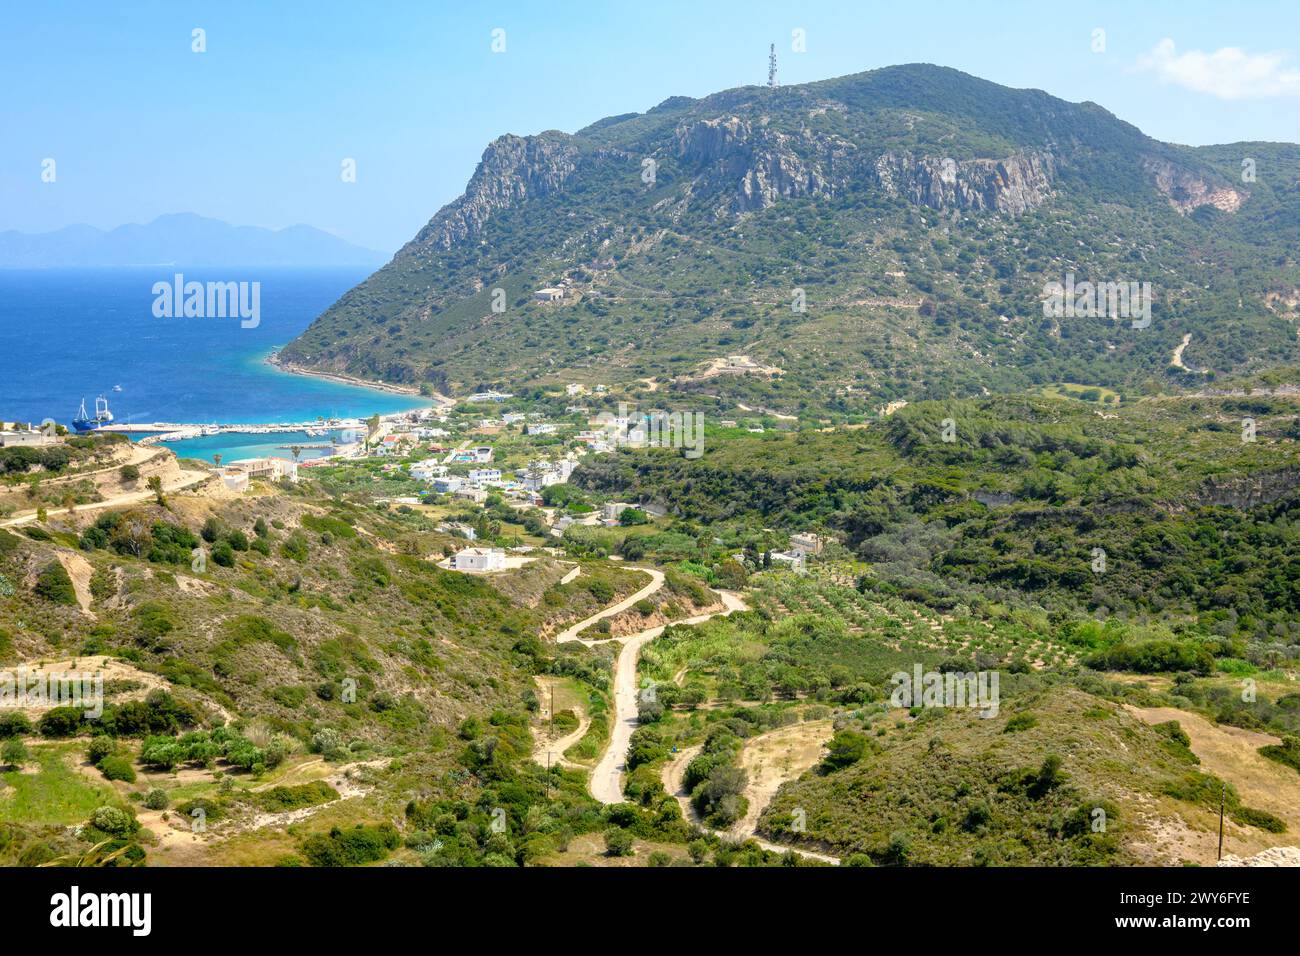 View of the city and port of Kefalos on the island of Kos. Greece Stock Photo